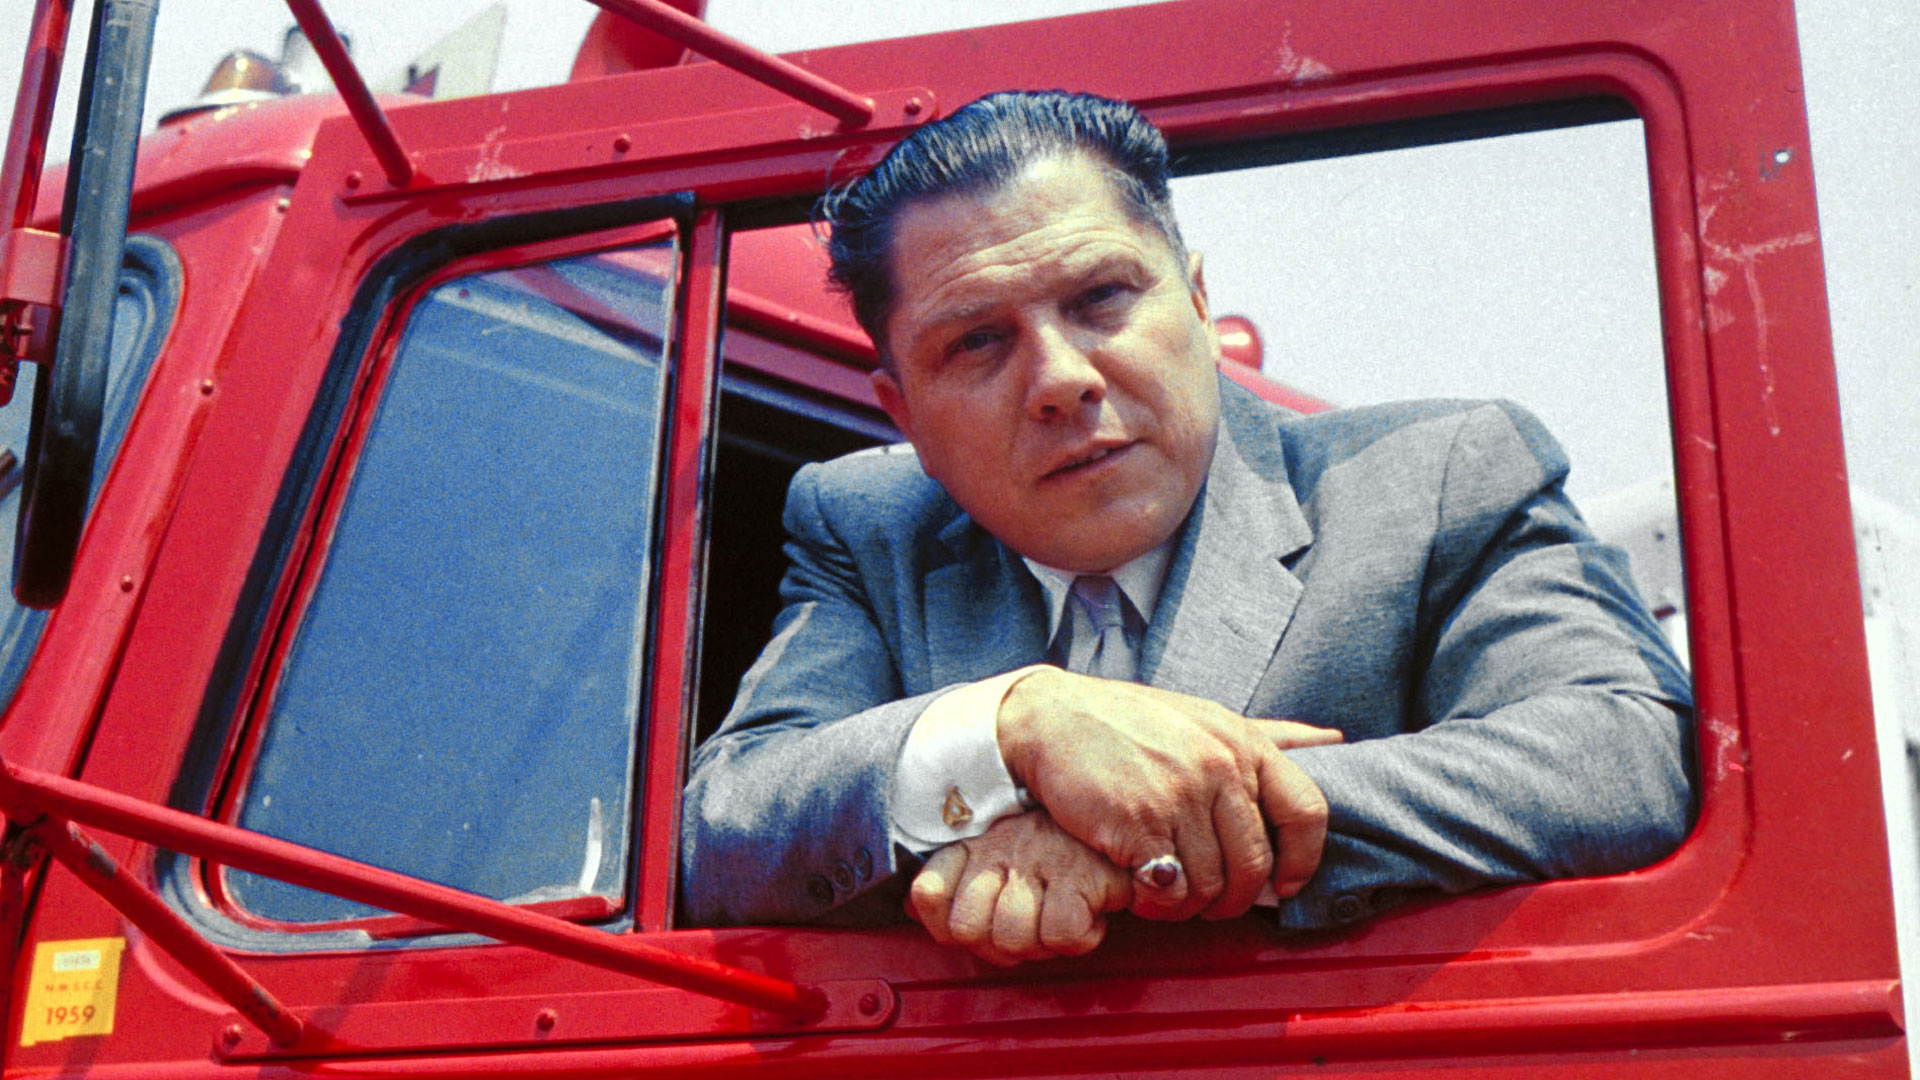 Jimmy Hoffa: The Most Credible and Most Outlandish Theories About His Death